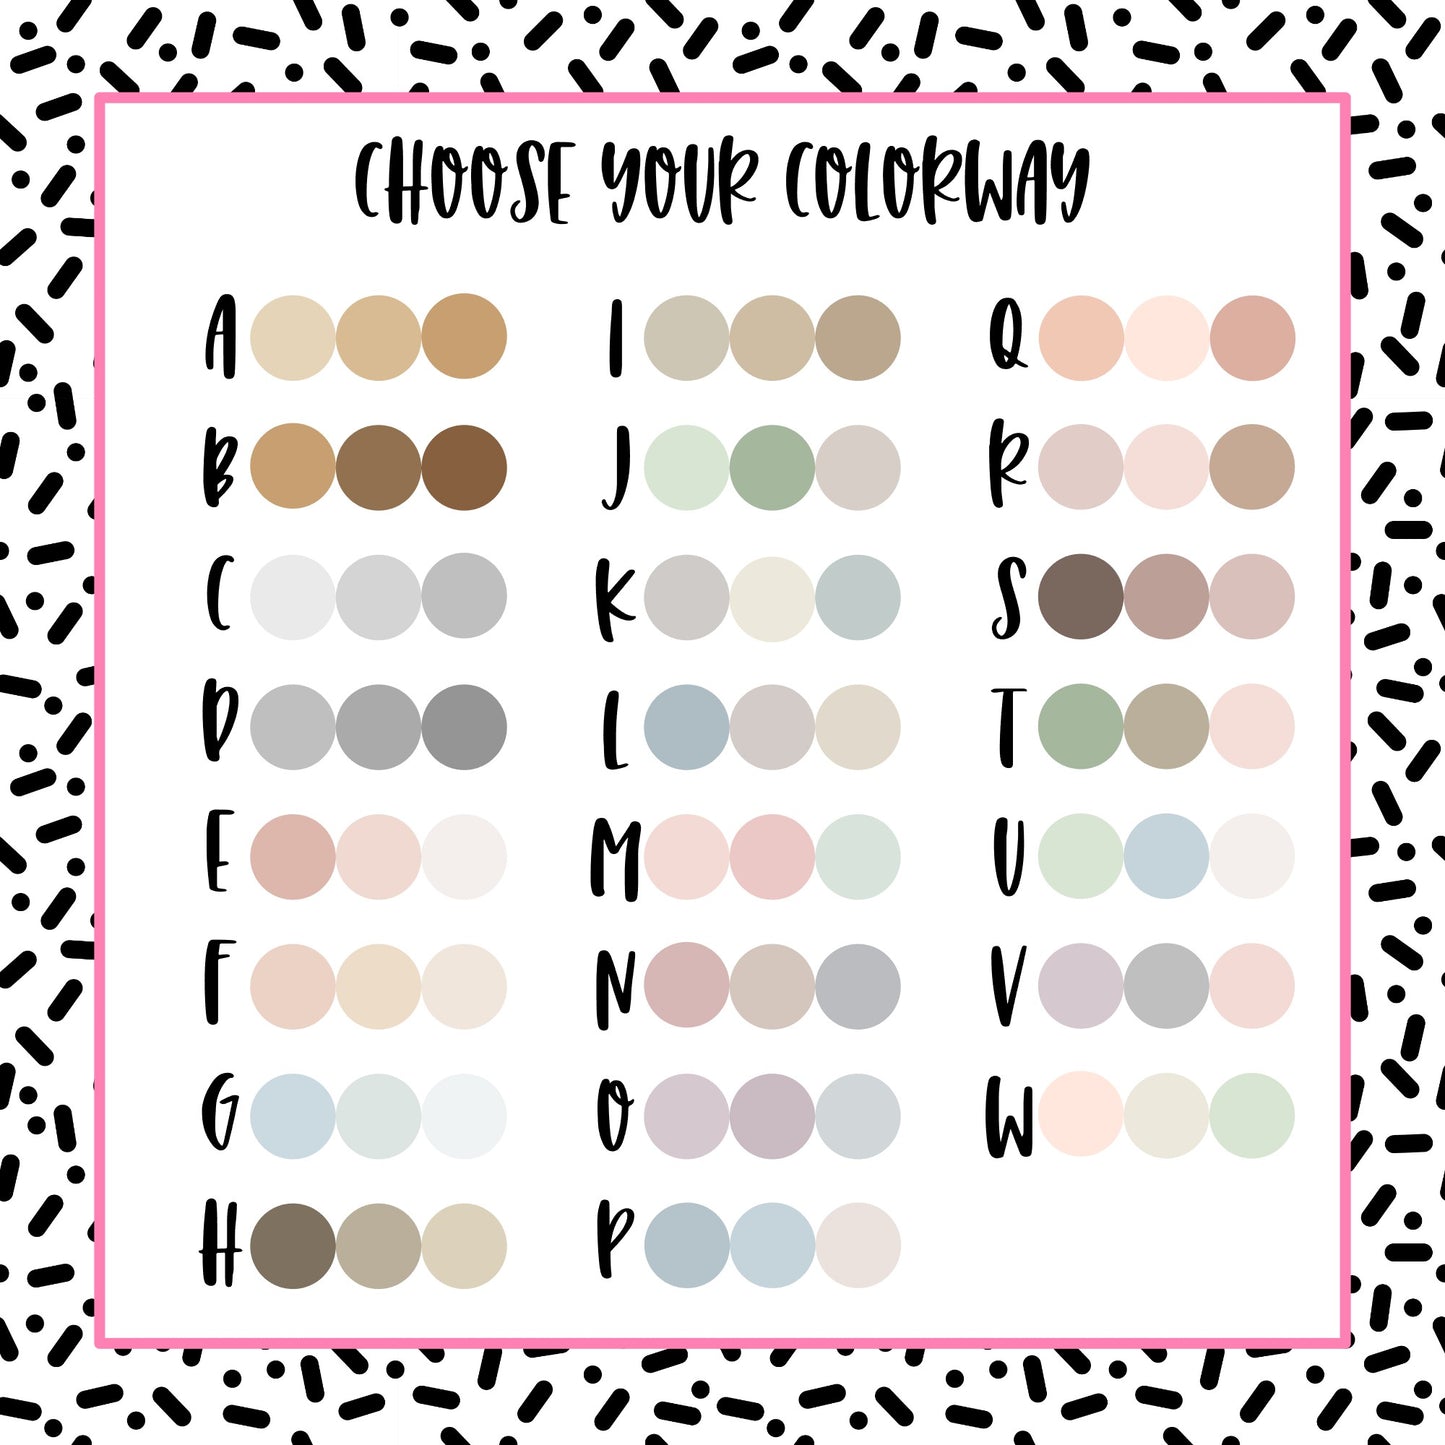 Neutral Shadowed Boxes - 23 color options